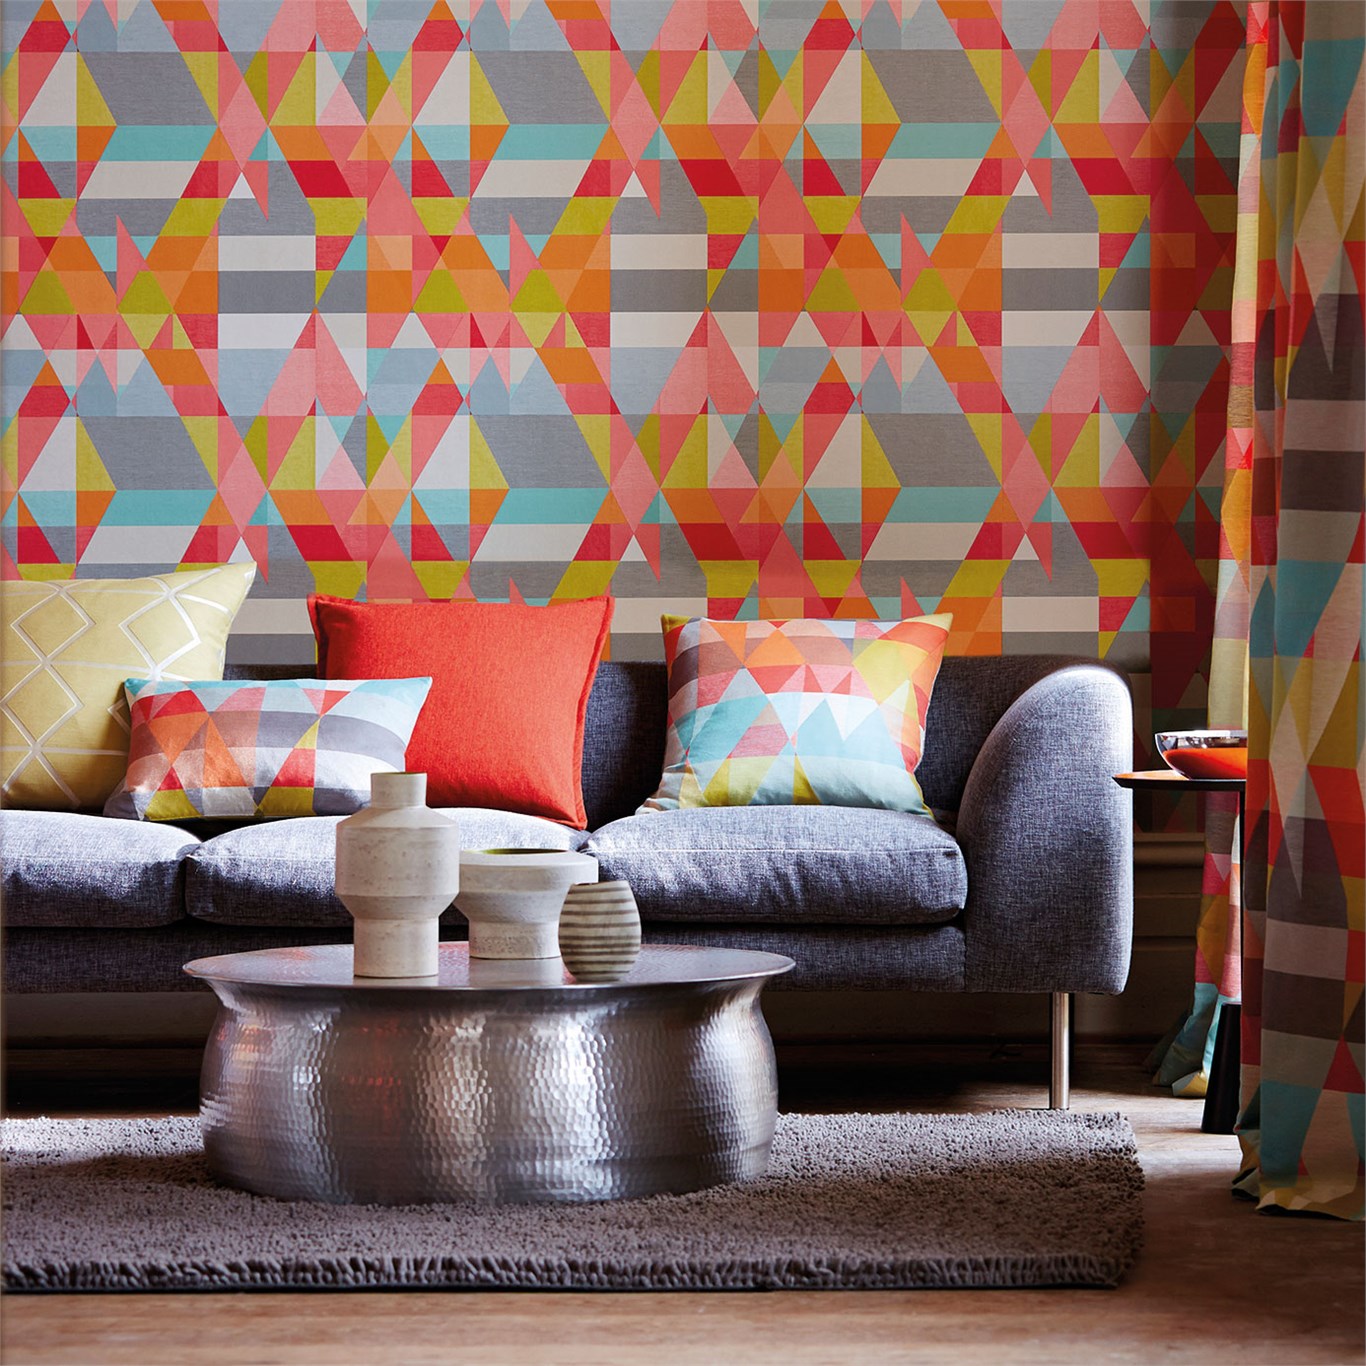 Axis, A Wallpaper By Scion, Part Of The Spirit & Soul - Orange Wallpaper For Living Room - HD Wallpaper 